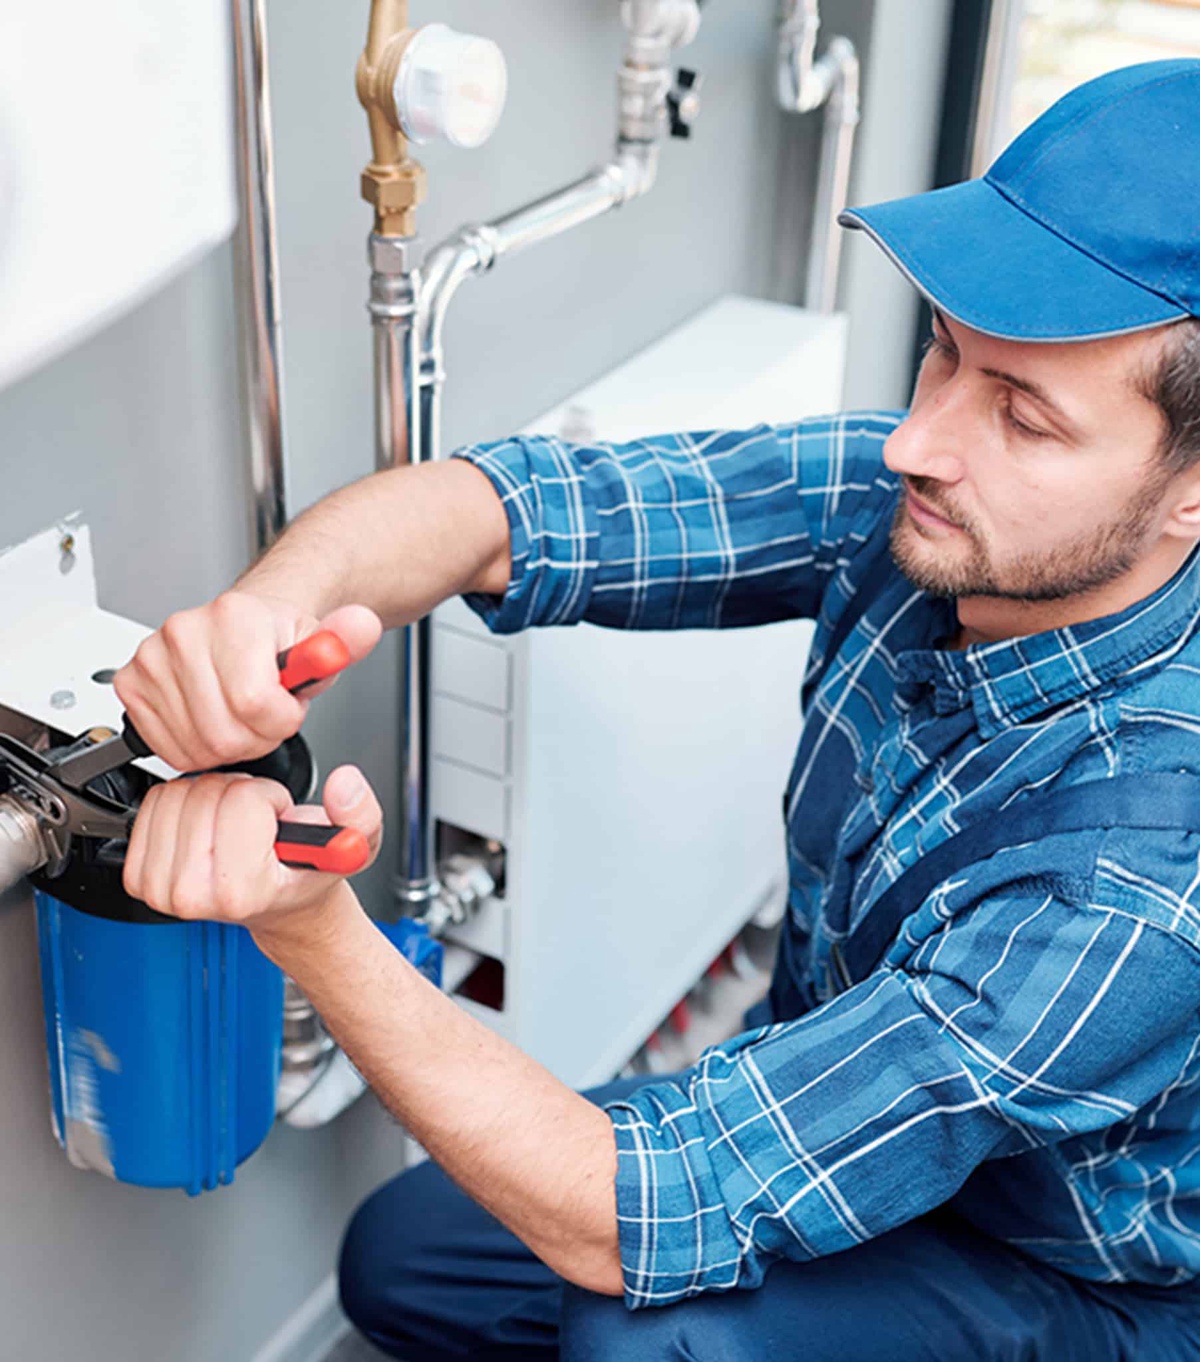 Customer's Guide to Evaluating the Quality of Plumbing Services in Dubai